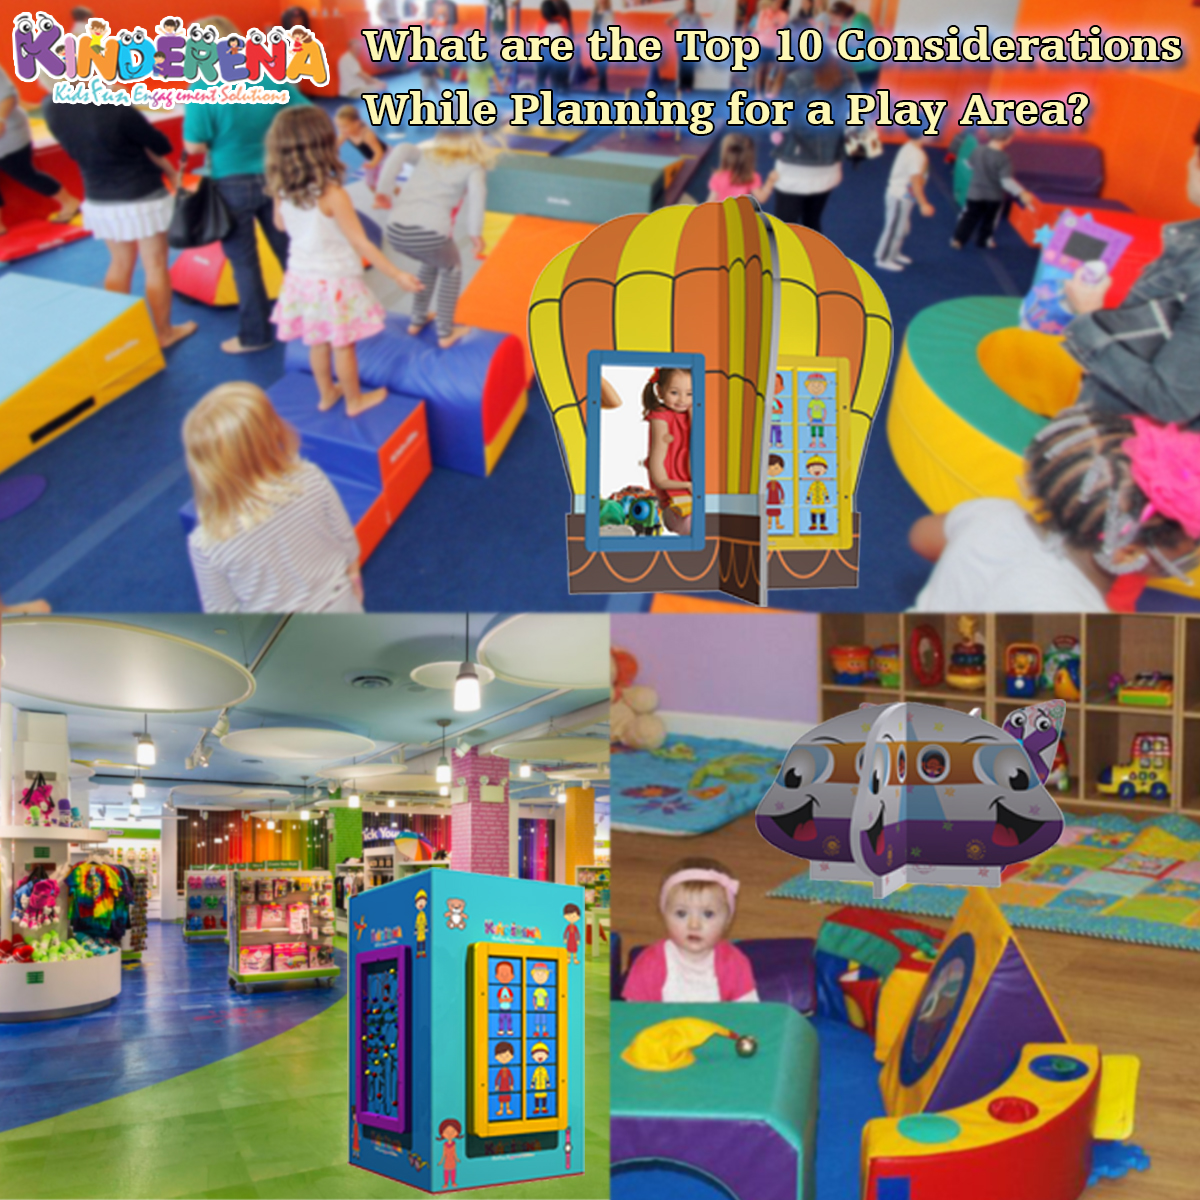 What are the Top 10 Considerations While Planning for a Play Area?